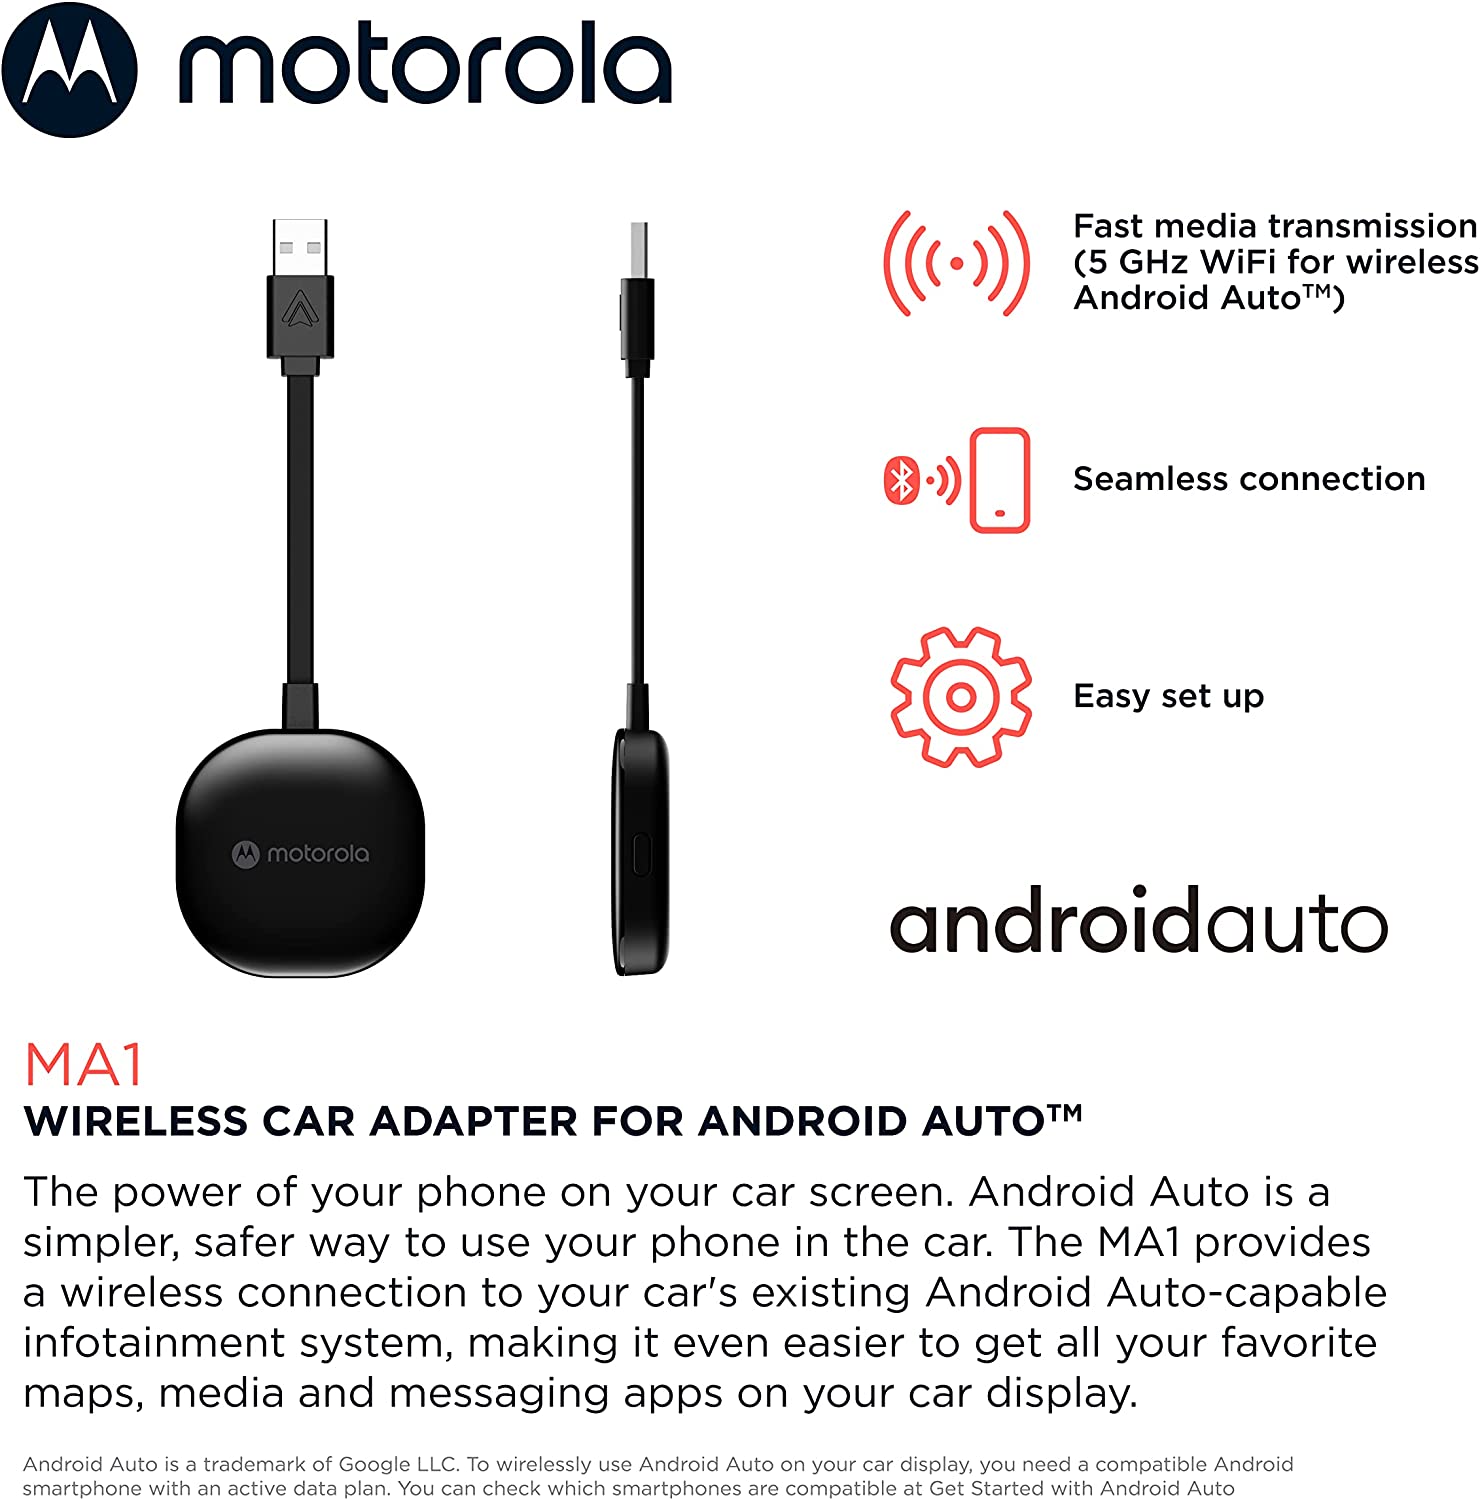 Wireless Android Auto adapter FAQs; what you need to know - 9to5Google